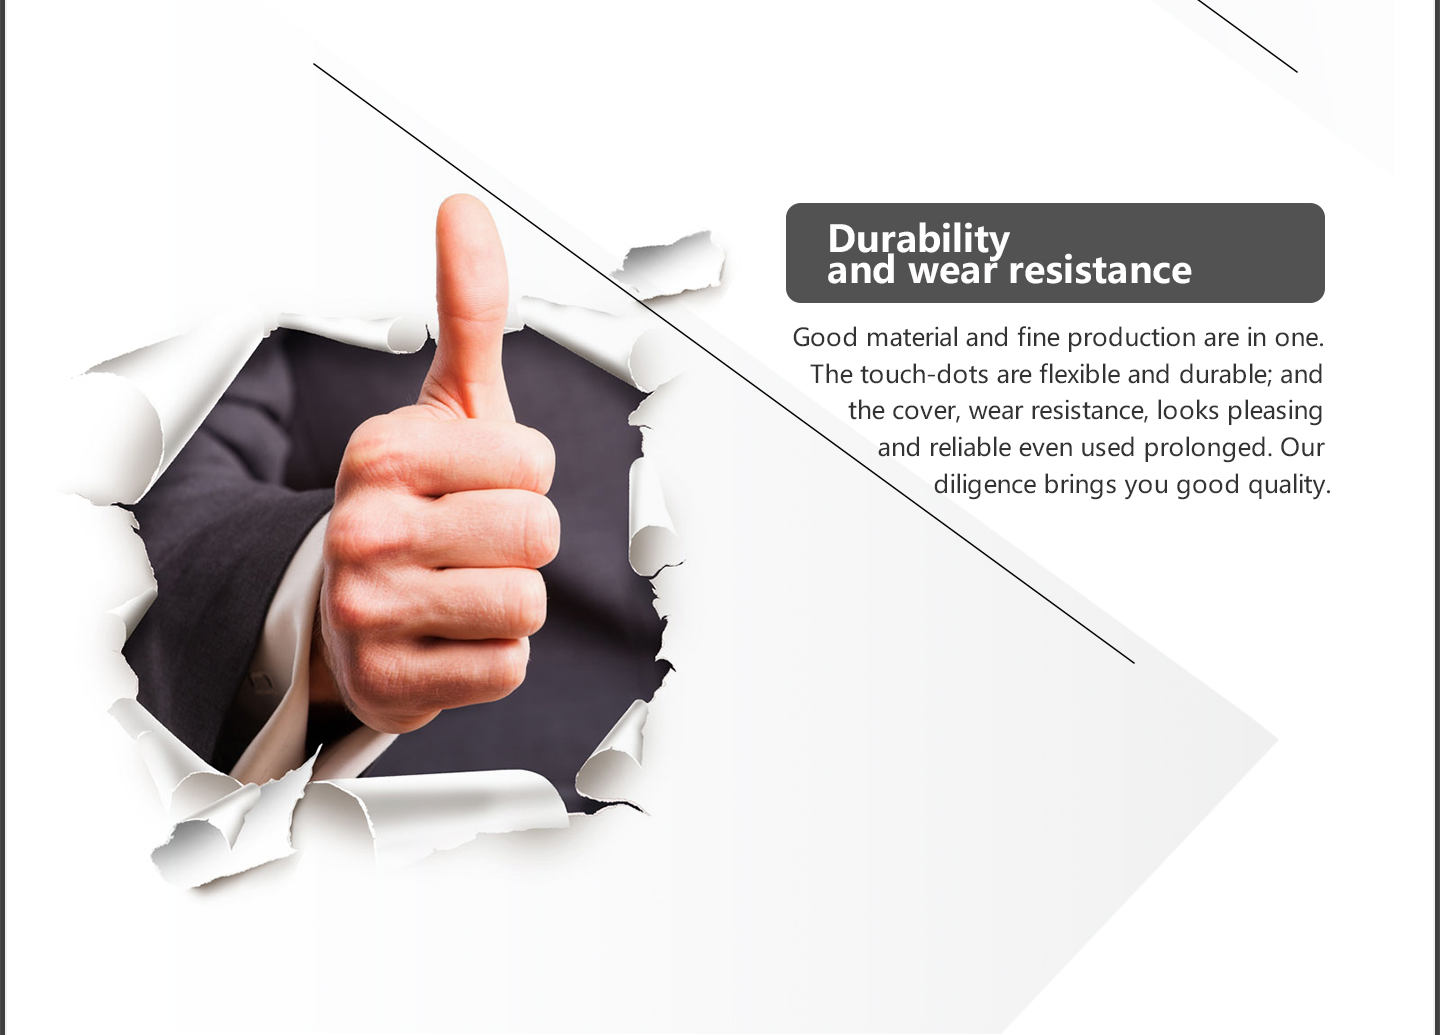 Durbility and wear resistance